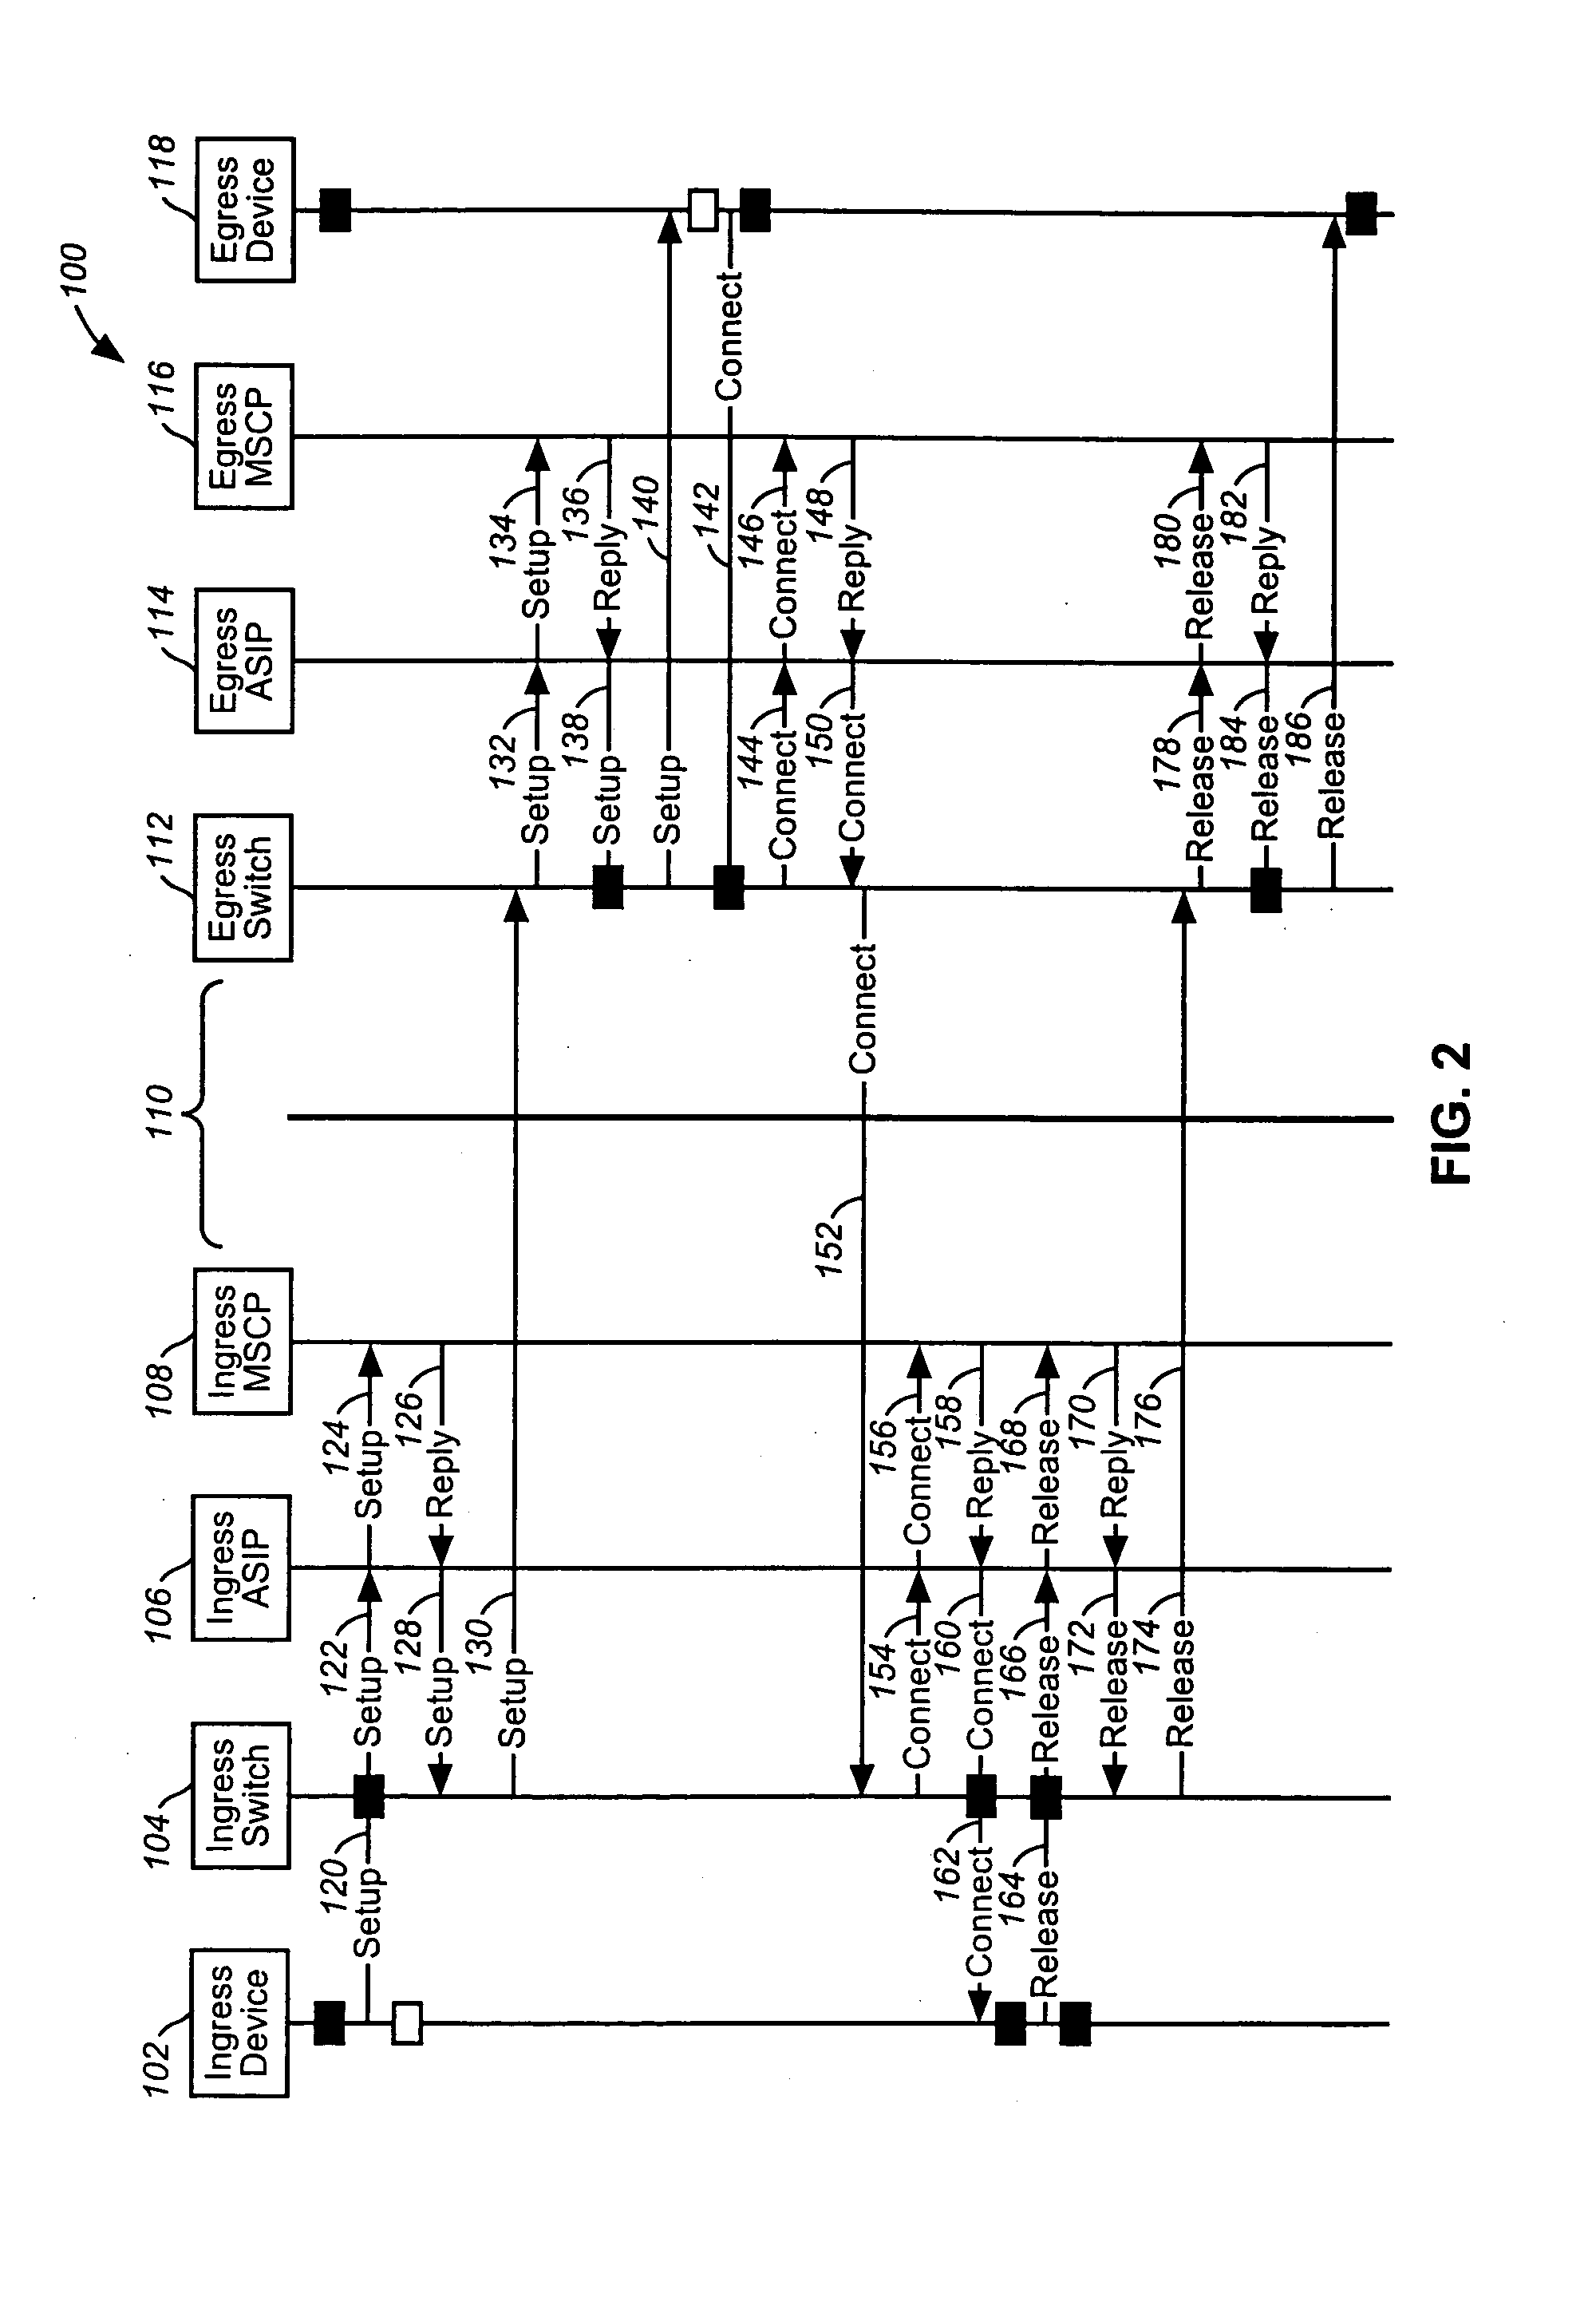 Intelligent network and method for providing voice telephony over ATM and private address translation